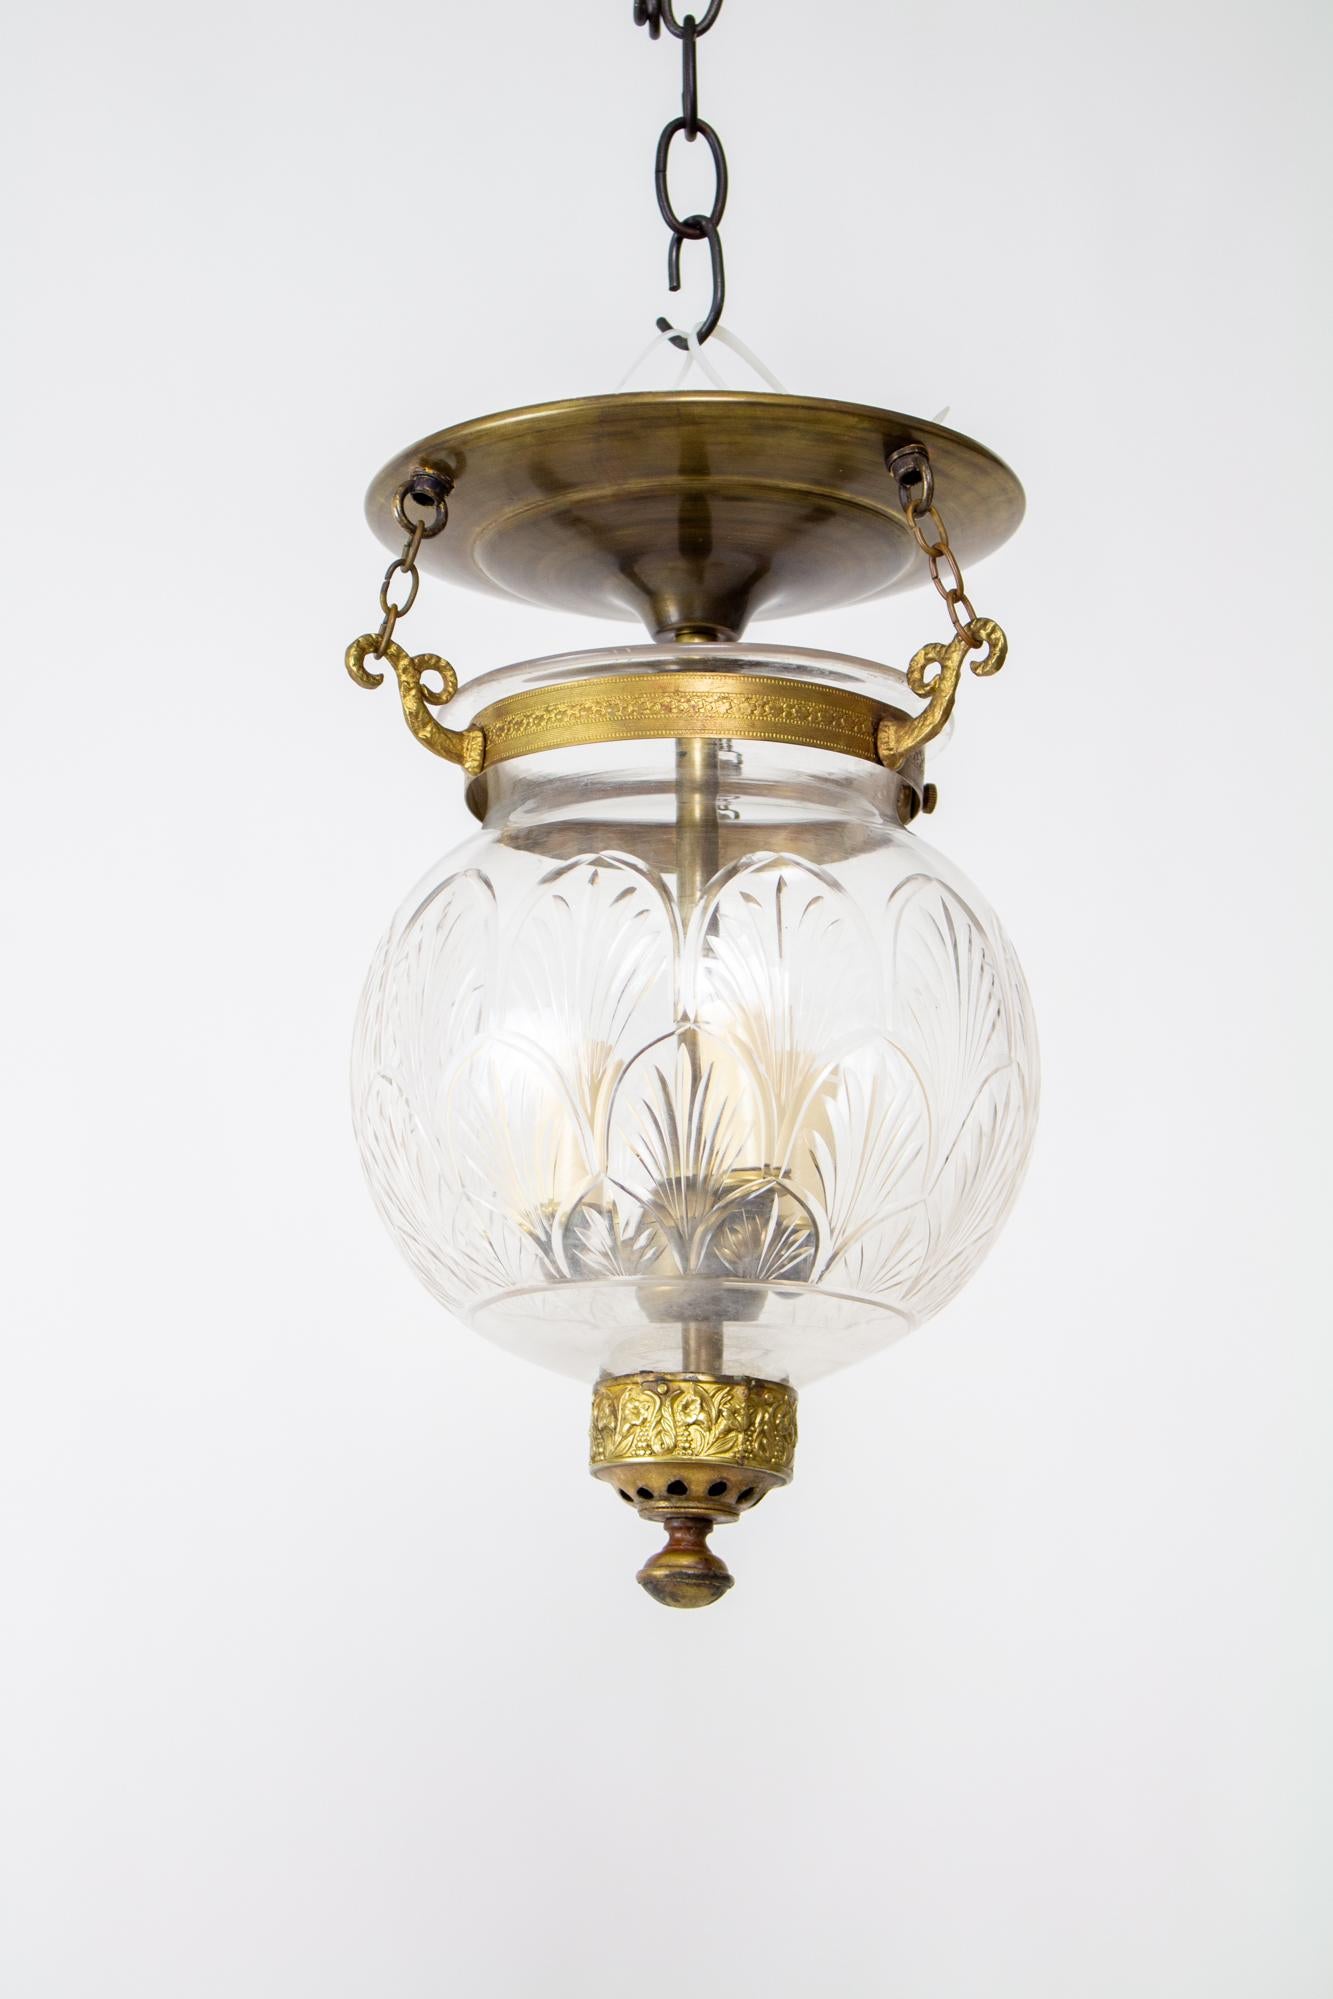 Bell jar lanterns first reached popularity in colonial India and due to their lingering popularity, production has continued to the present. Made from delicately blown clear glass with a scaled palm frond pattern. The glass is suspended by three